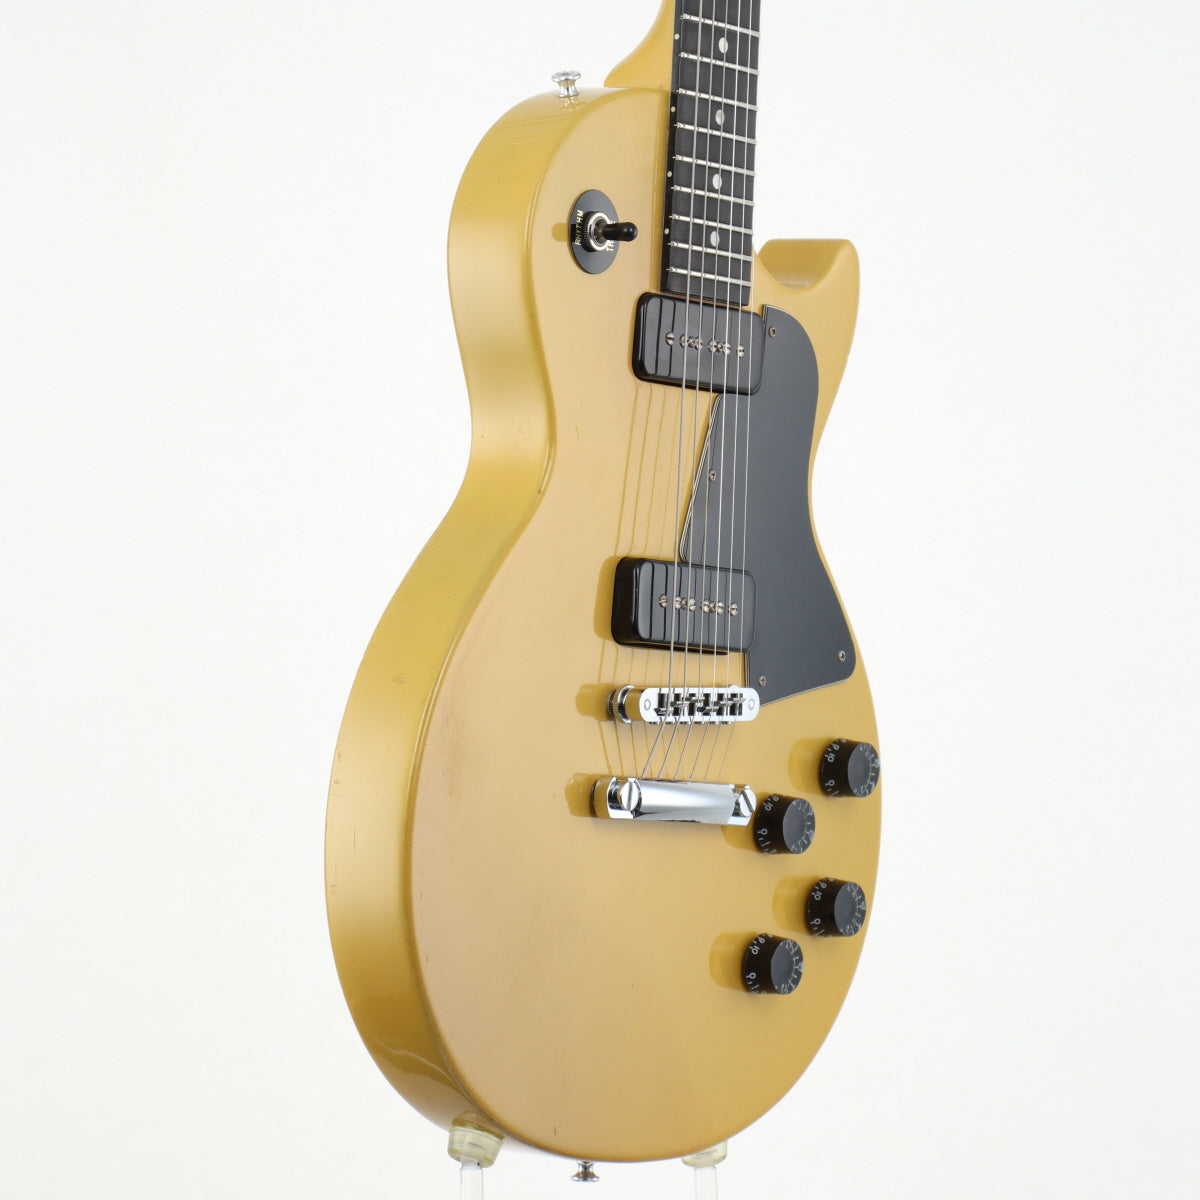 [SN 024390511] USED Gibson USA / Les Paul Special TV Yellow [11]